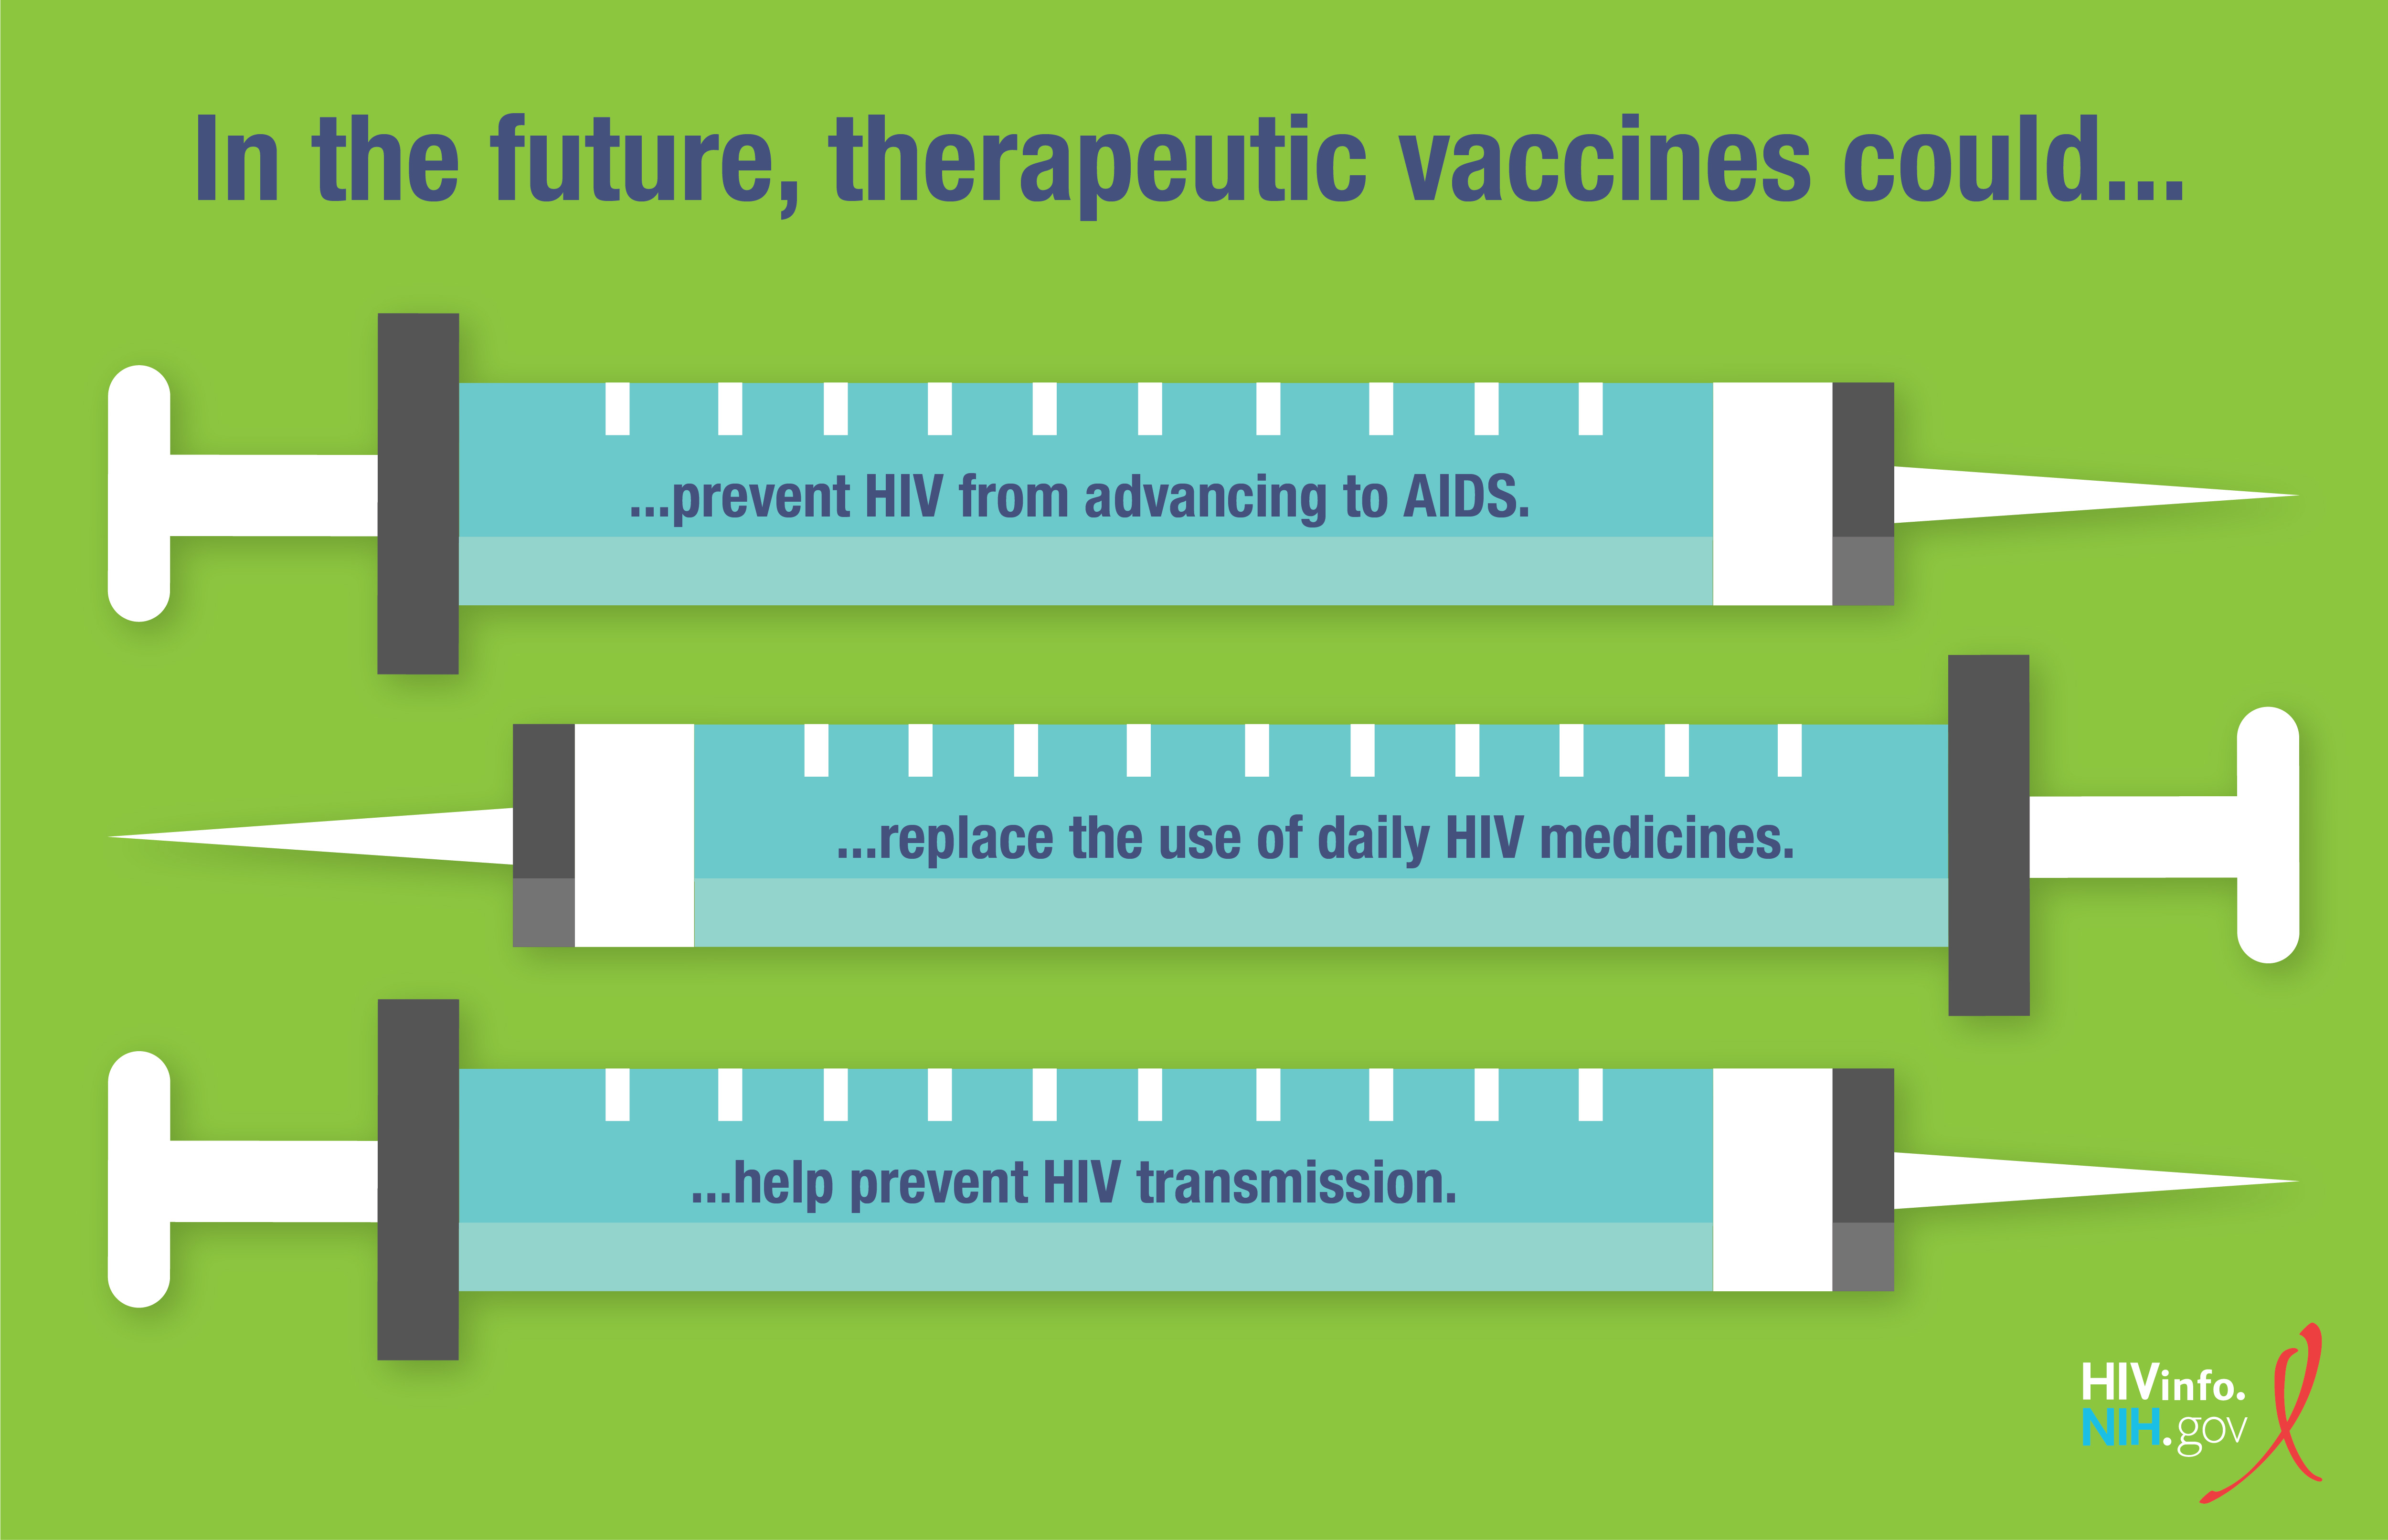 A therapeutic HIV vaccine is a vaccine that’s designed to improve the body’s immune response to HIV in a person who already has HIV